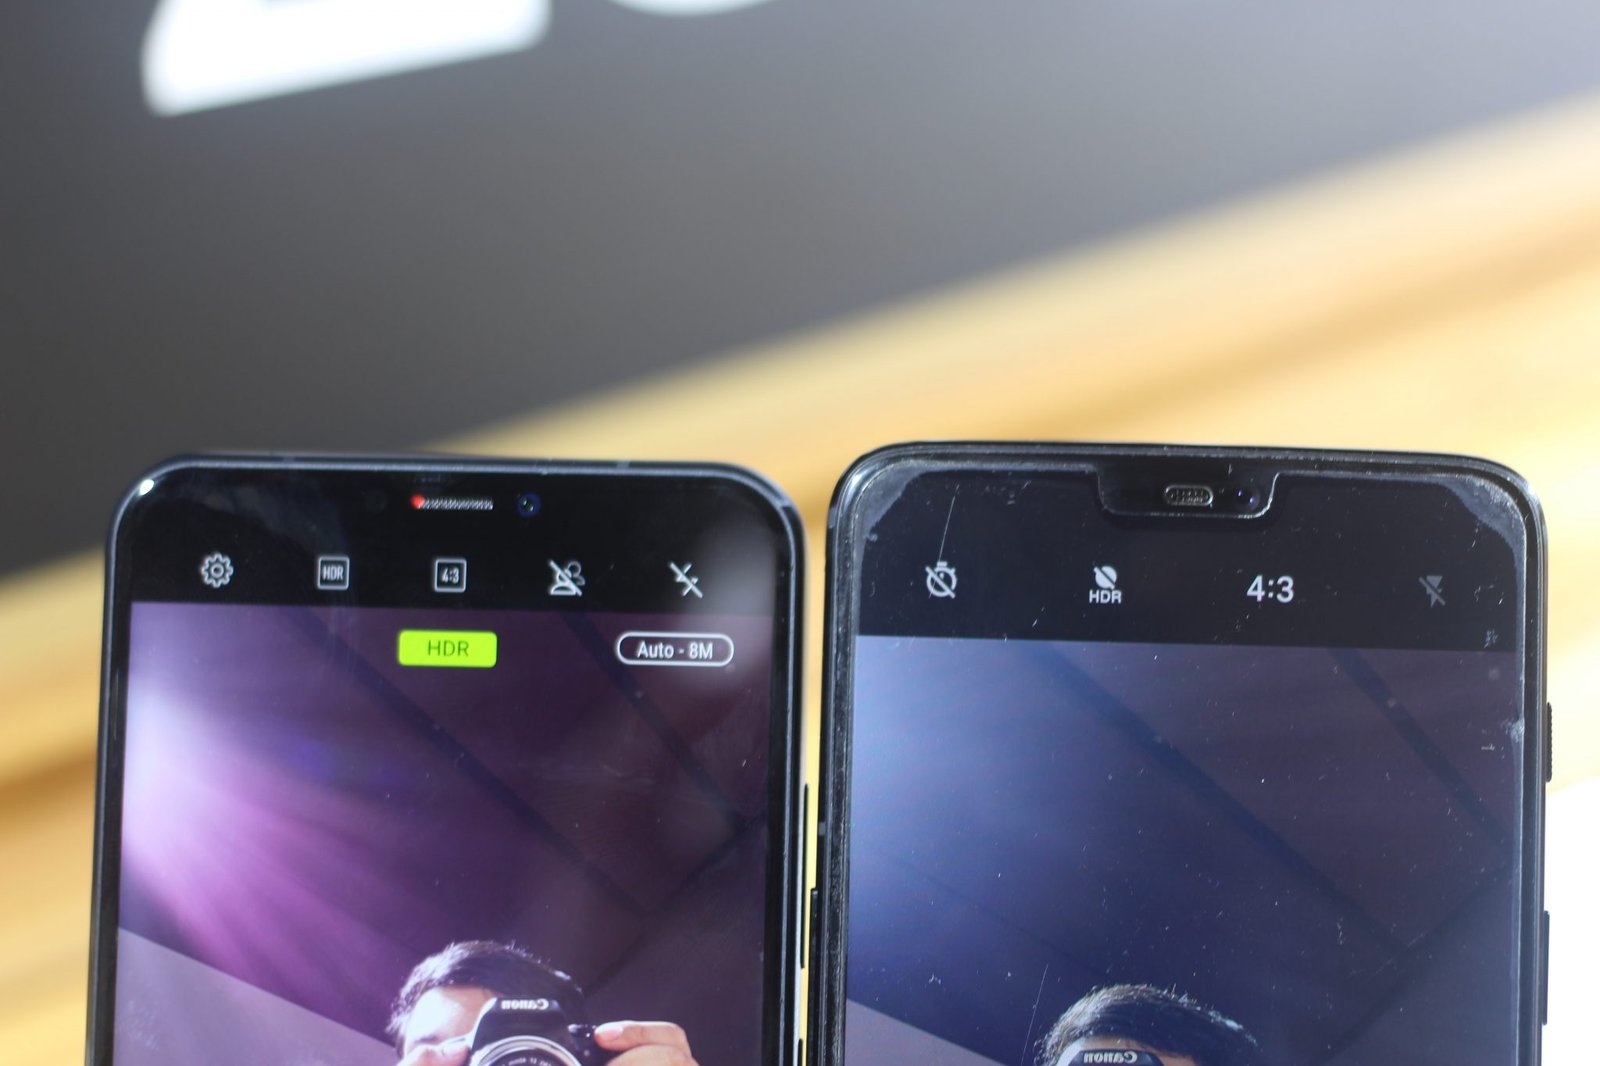 Asus Zenfone 5Z And OnePlus 6 Display